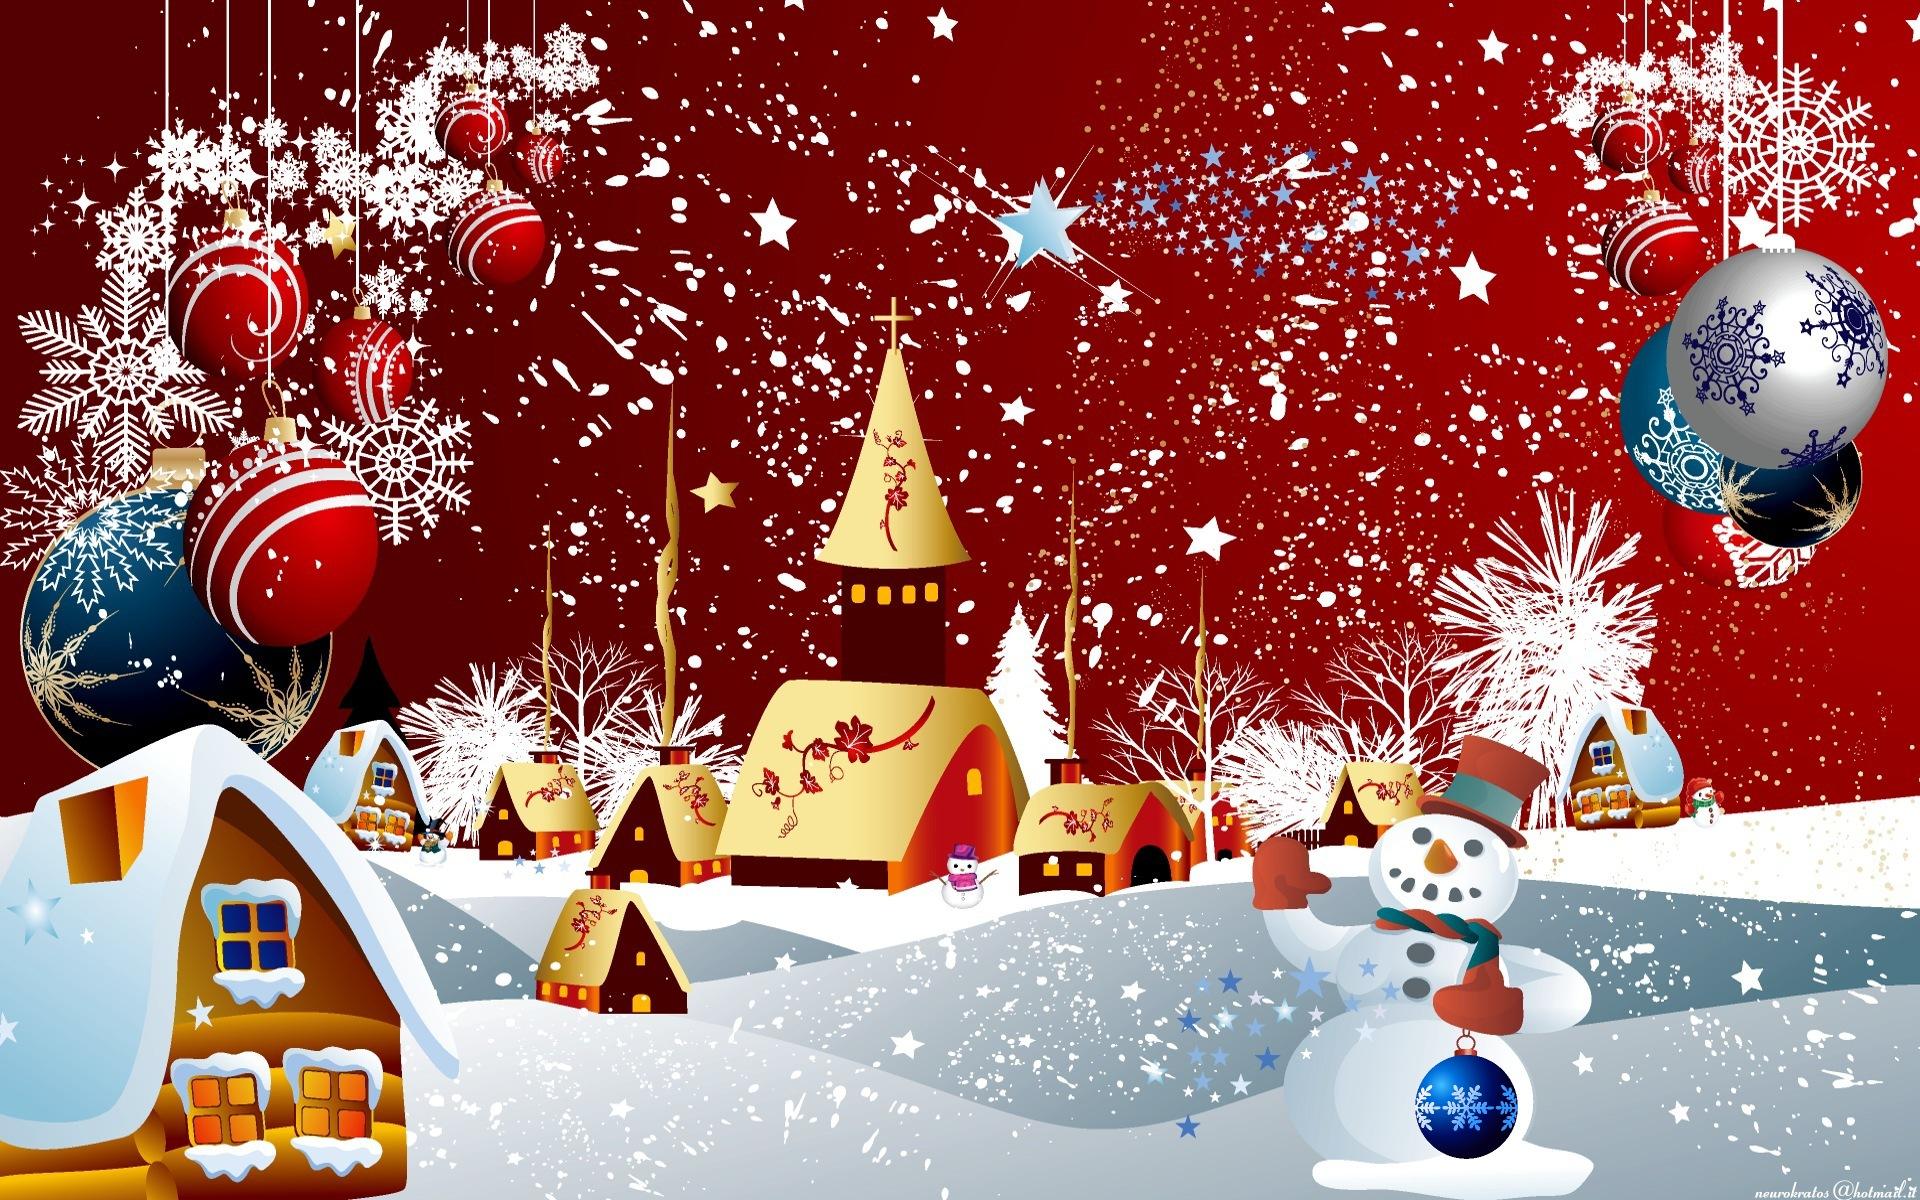 Free Download Merry Christmas Photos Hd Wallpapers Pulse Images, Photos, Reviews